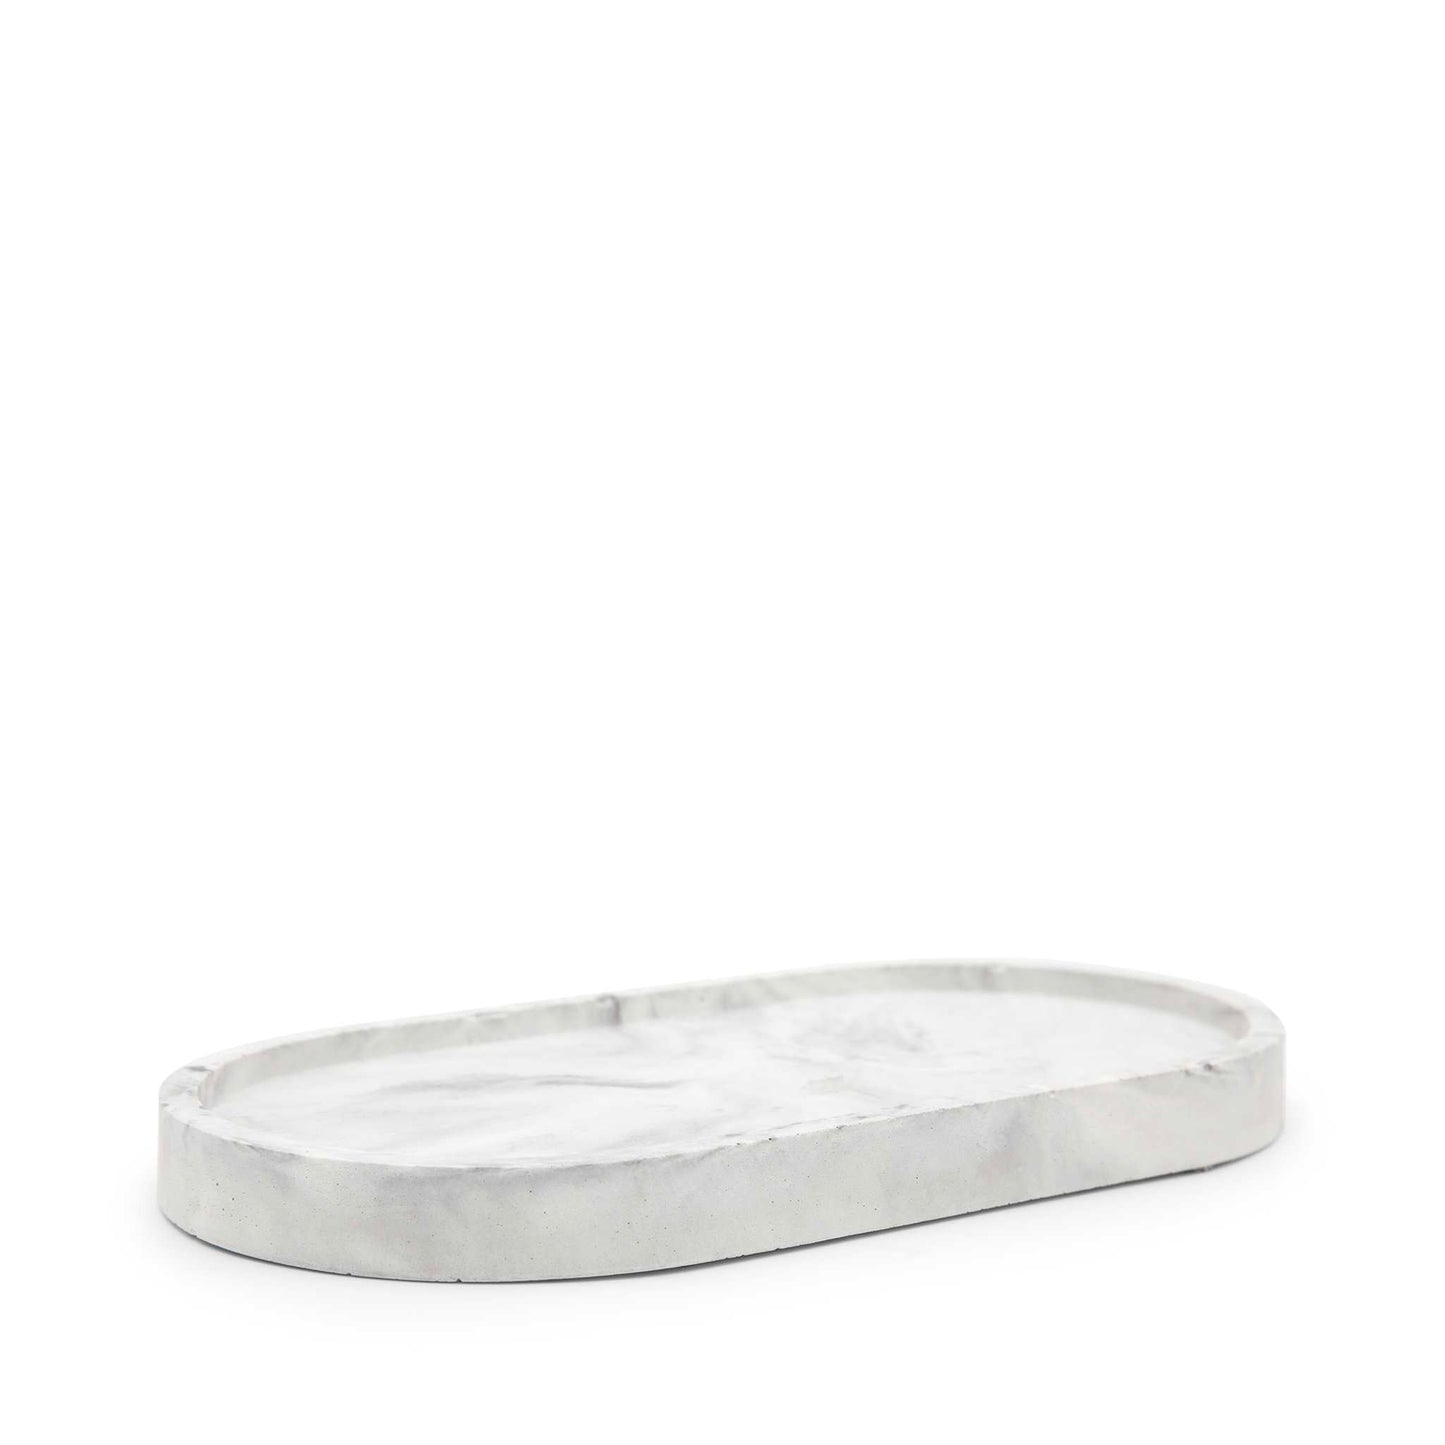 Faerly Homewares Concrete Oval Decorative Tray  - Marbled Black & White